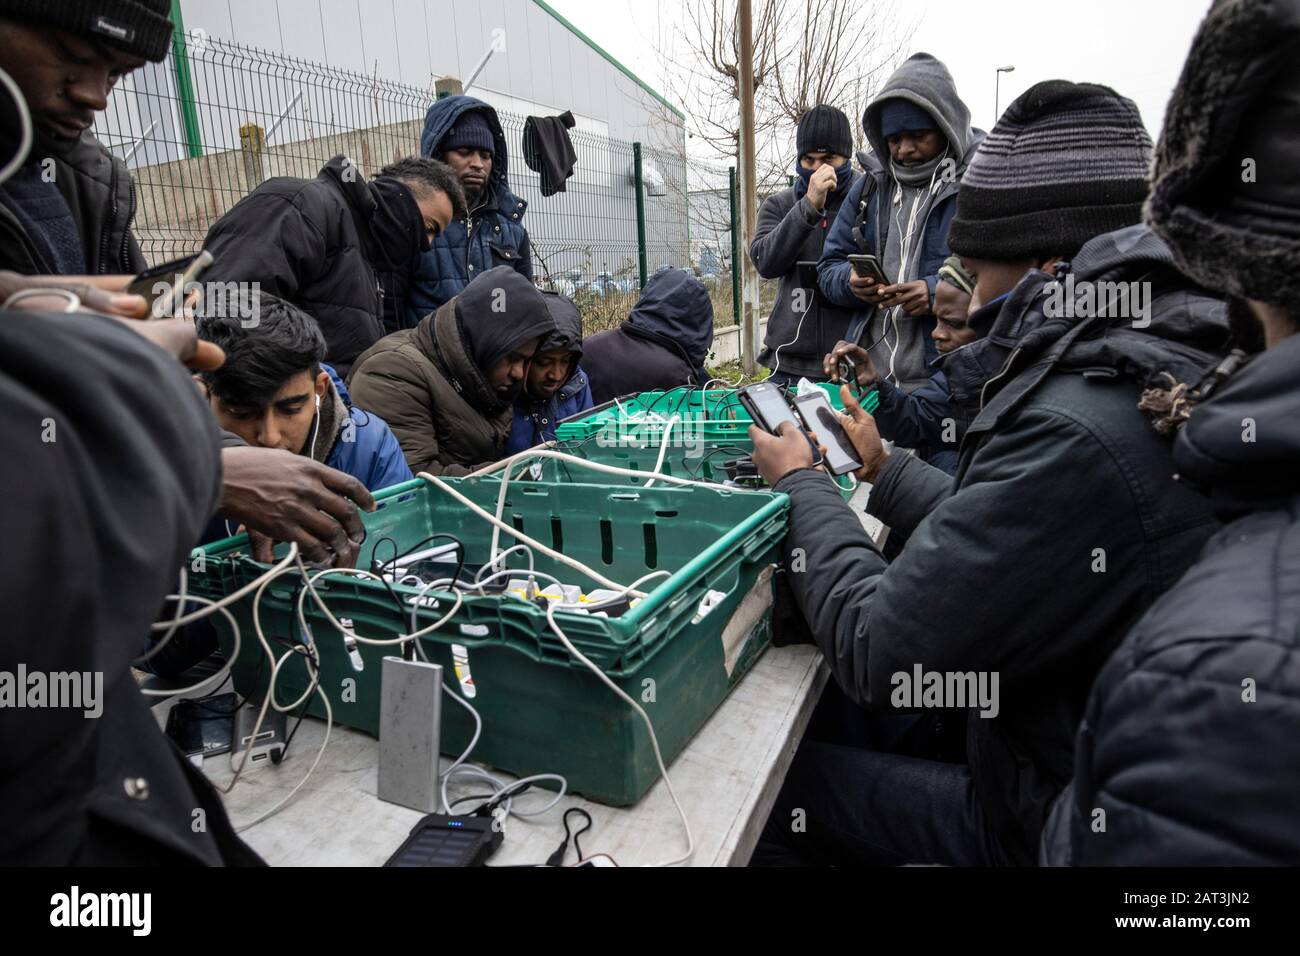 Migrants sleeping rough in the Calais illegal refugee camps on the outskirts of the Calais port seeking to cross the channel to the UK Stock Photo